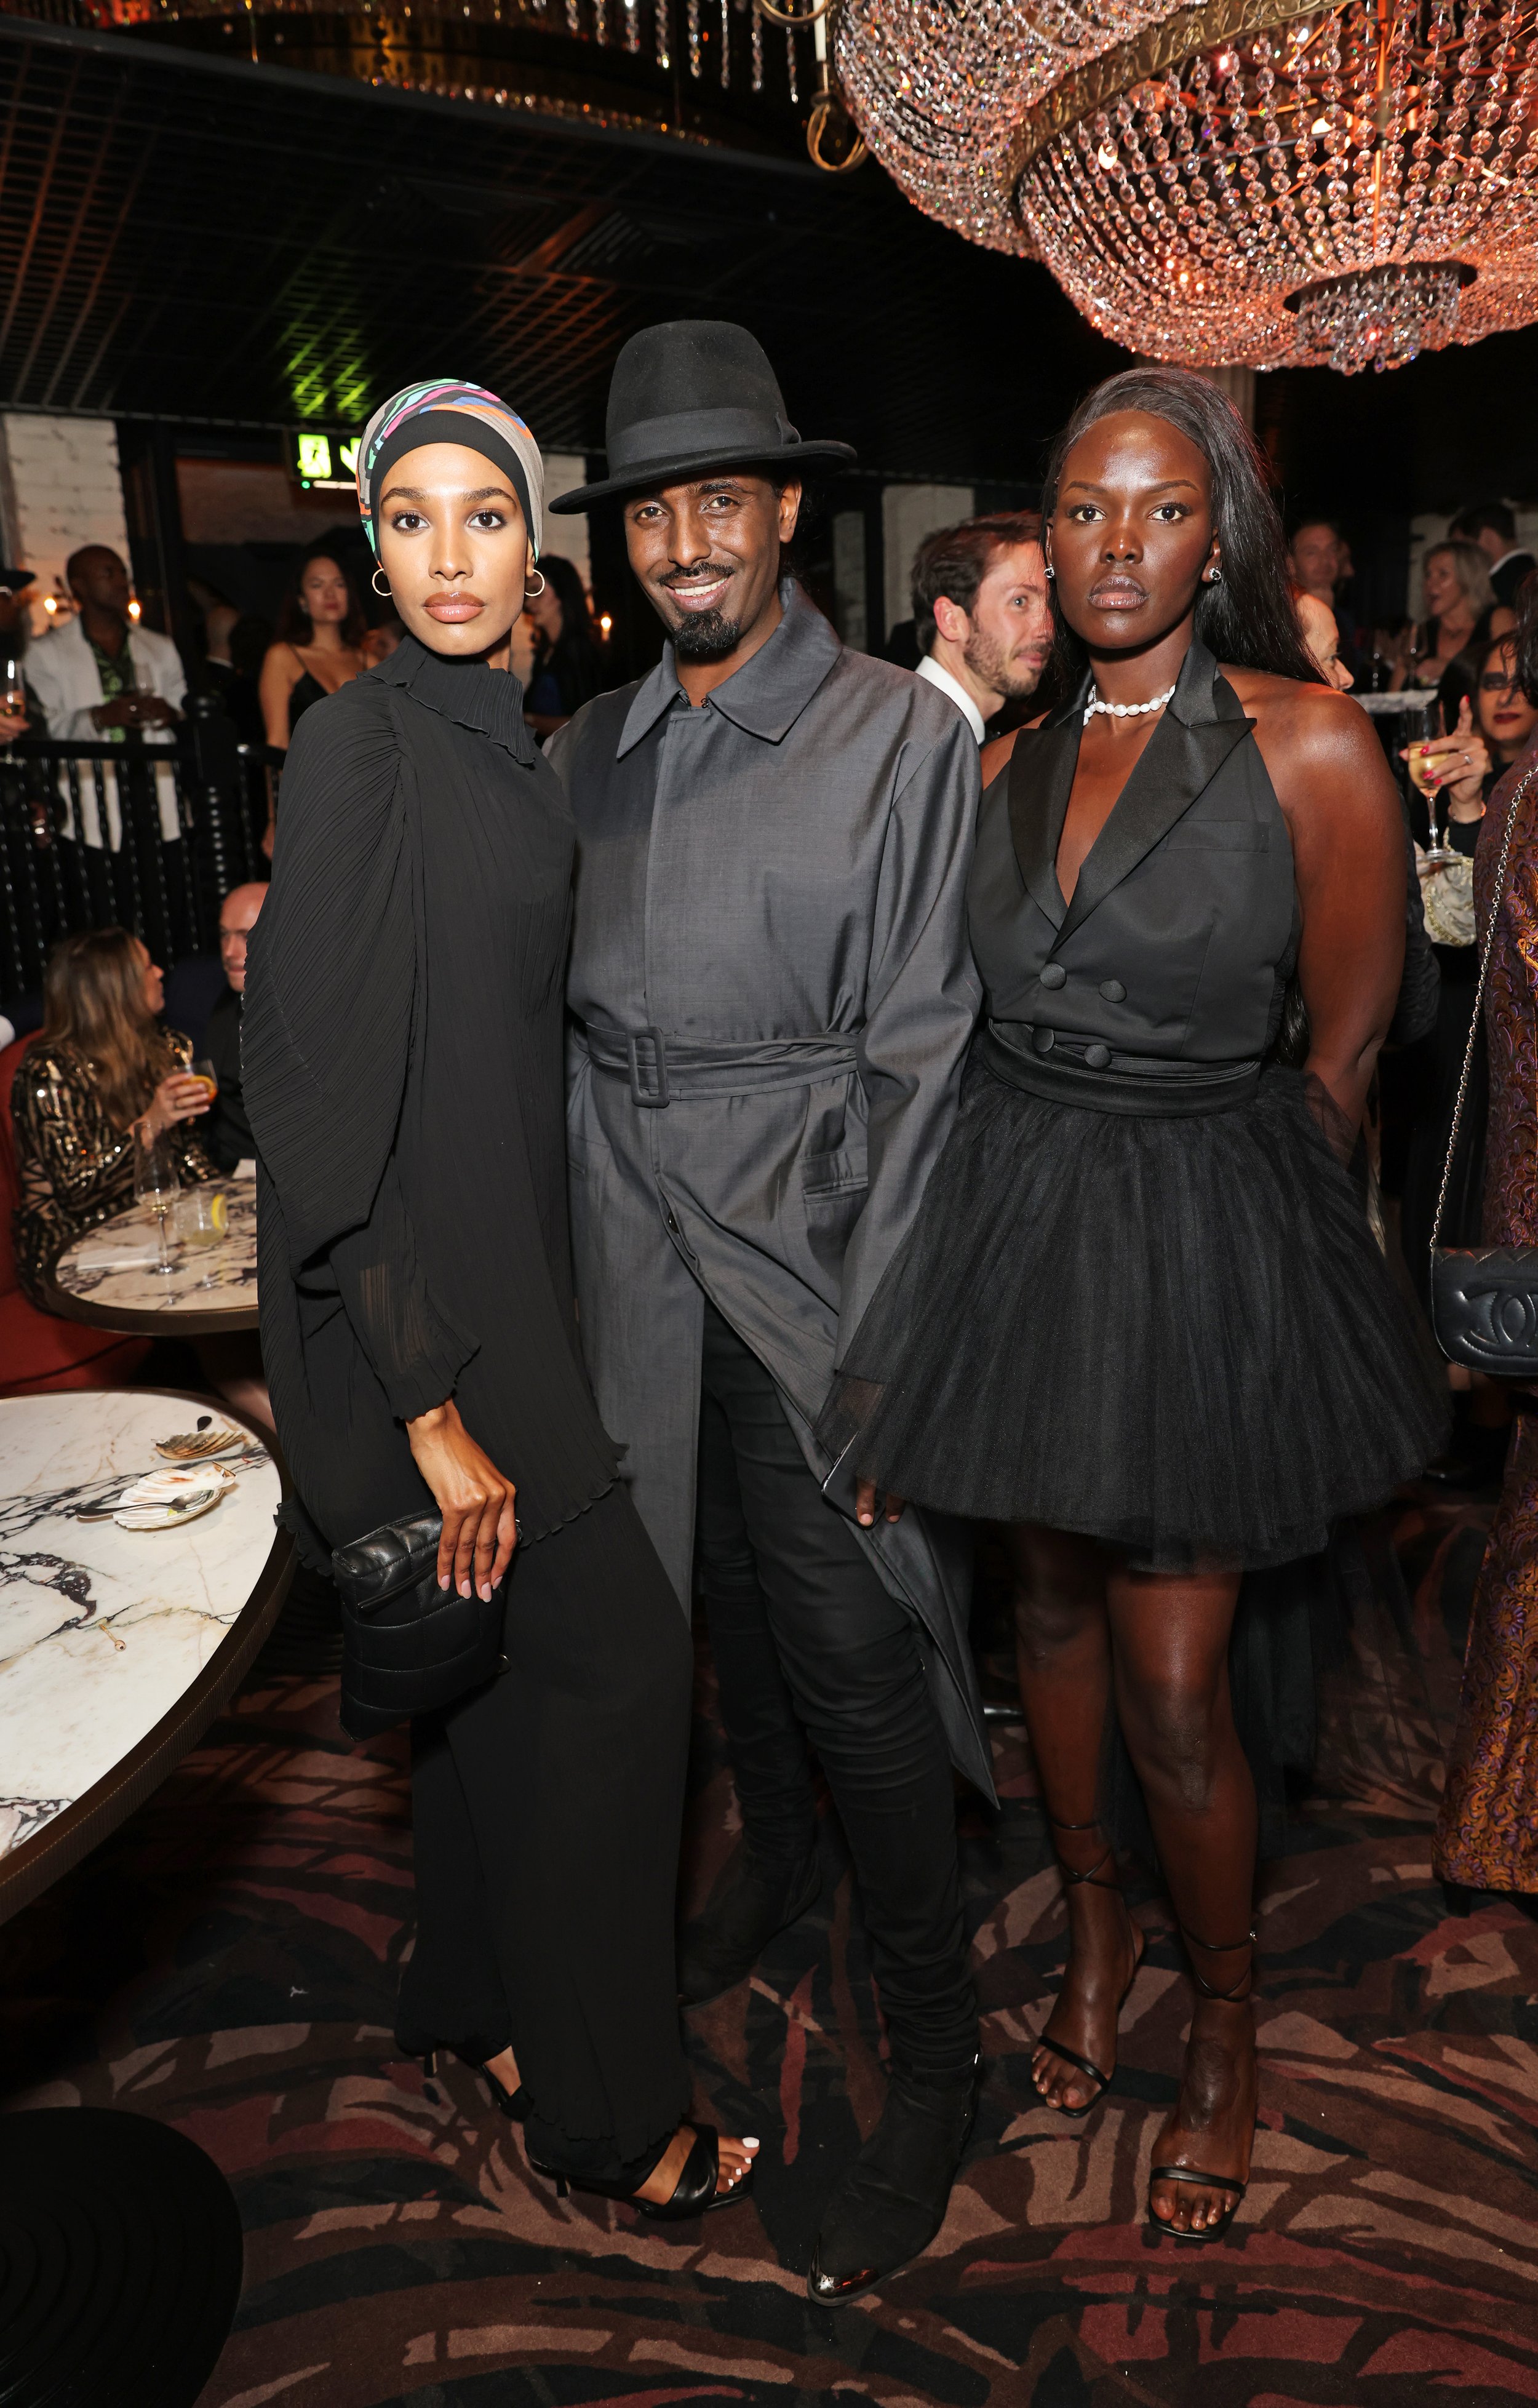 Ikram Abdi Omar,Mason Smillie and Ariish Wol at The MAINE Mayfair Launch Party38.jpg